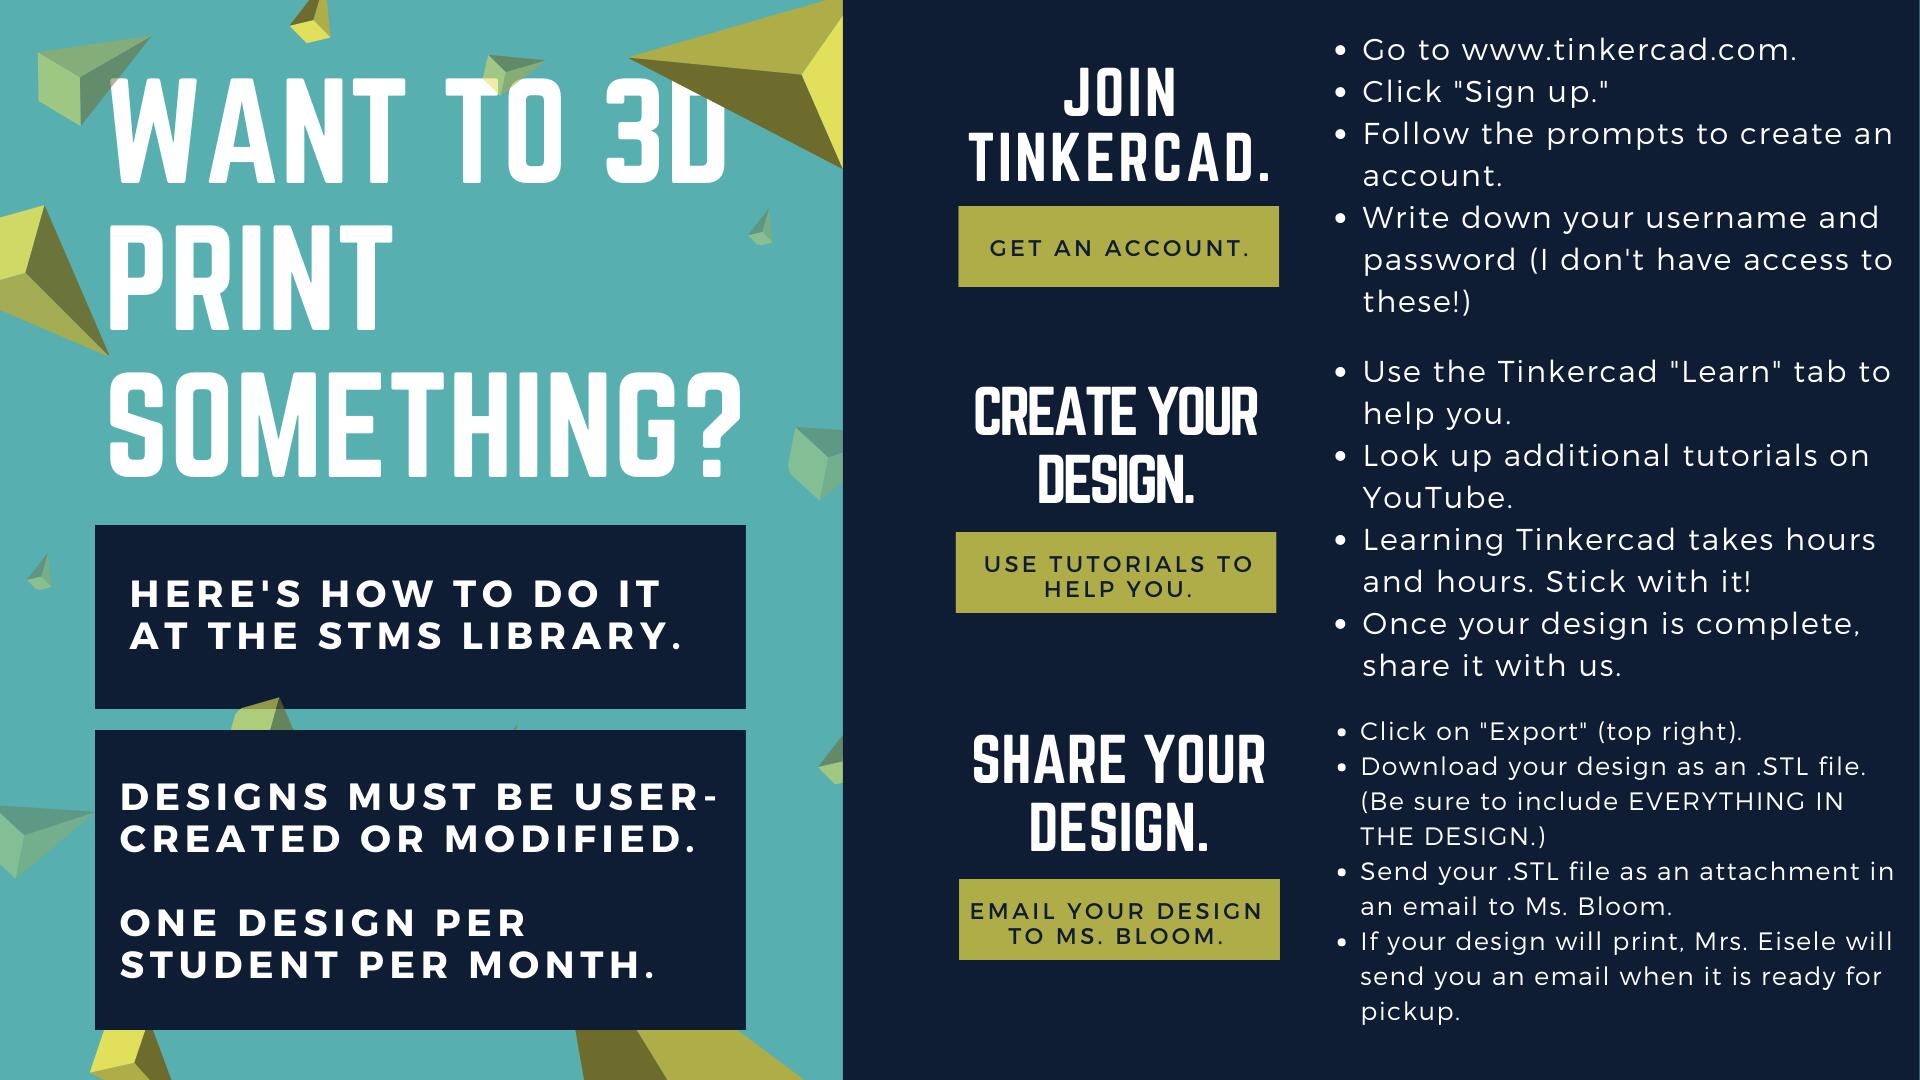 Want to print something? Here's how to do it at teh STMS Library. join tinkercad. Get an account. Go to tinkercad.com click on sign up, follow the prompts to create an account. write down your username and password (I don't have access to these!) Create your design. Use tutorials to help you. Use tinkercad's learn tab to help you. look up additional tutorials on youtube. Learning tinkercad takes hours and hours, stick with it. Share your design, complete teh google form. Click on export (top right) download your design as an STL file. complete the google form located under the makerspace tab of the library webpage. Attach your STL file to the google form. click submit! Ms. Bloom will let you know when your design is ready for pick up